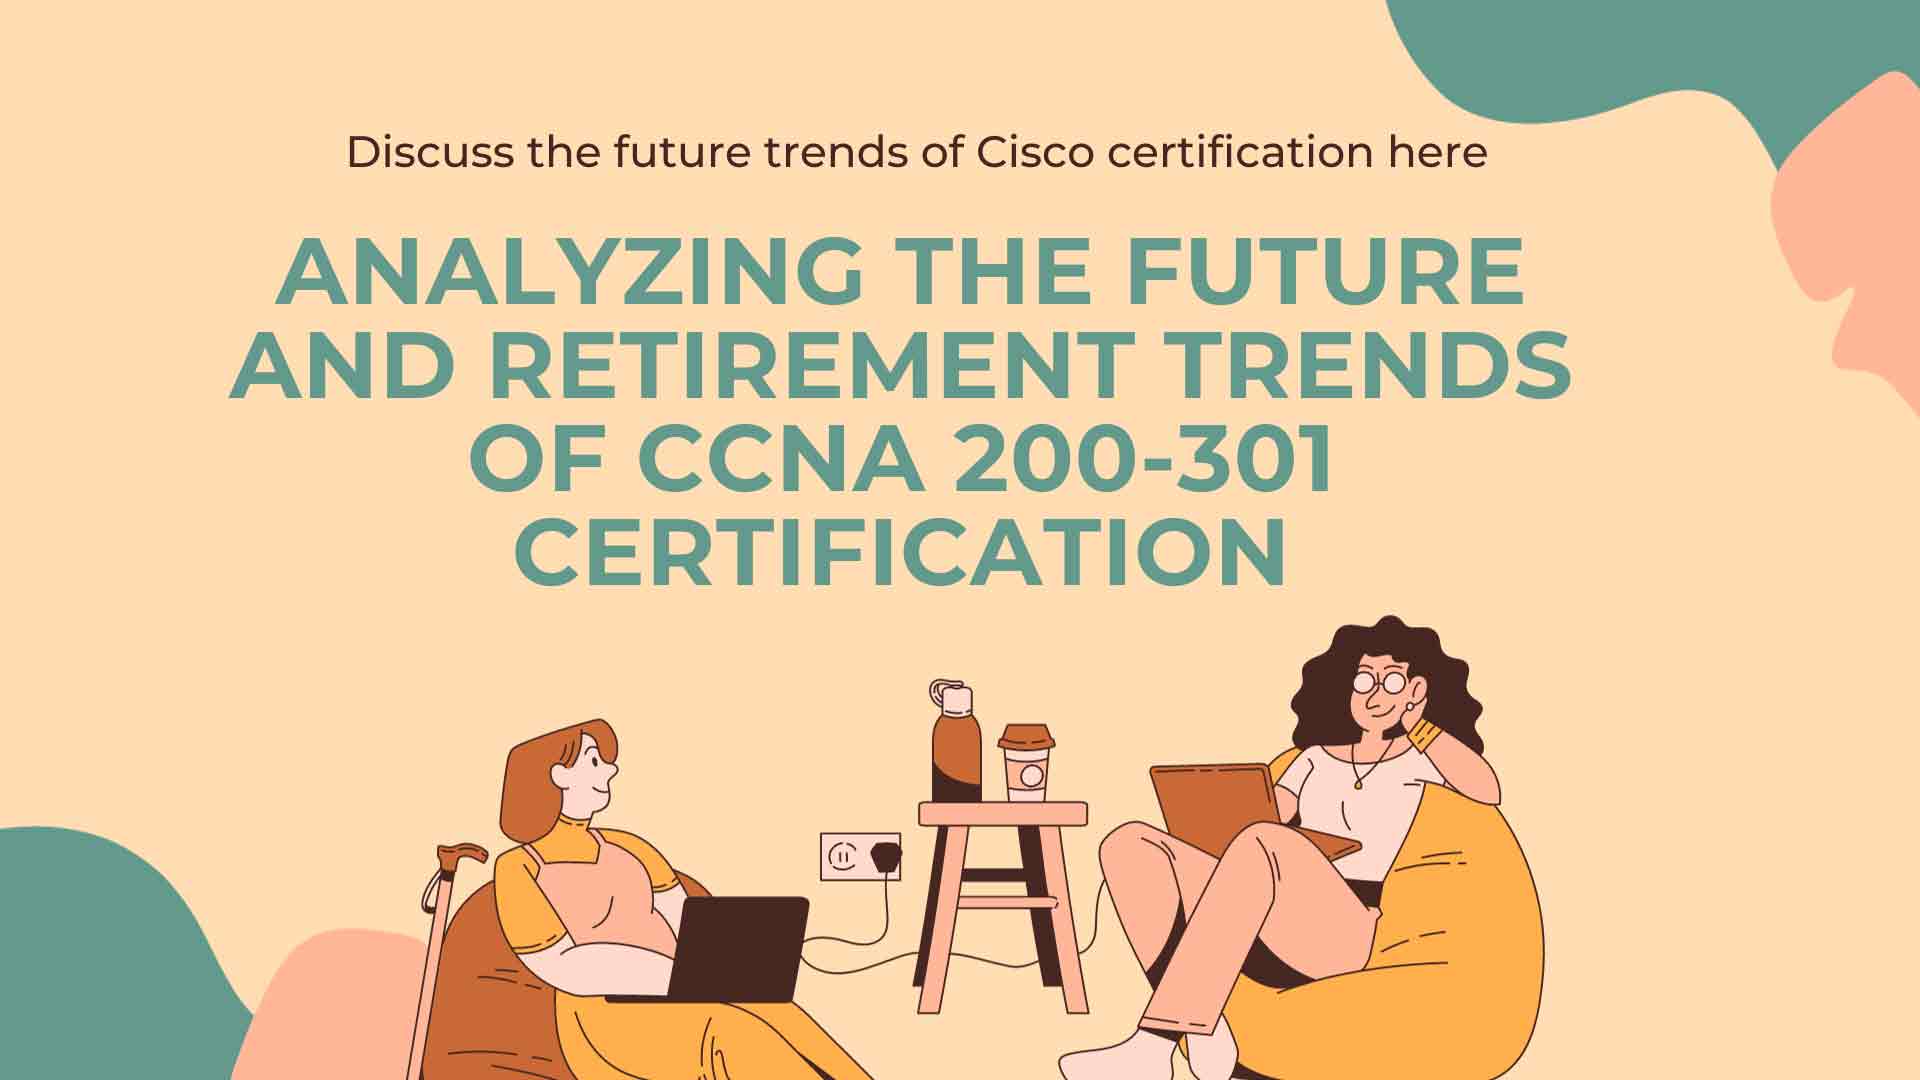 Analyzing the Future and Retirement Trends of CCNA 200-301 Certification